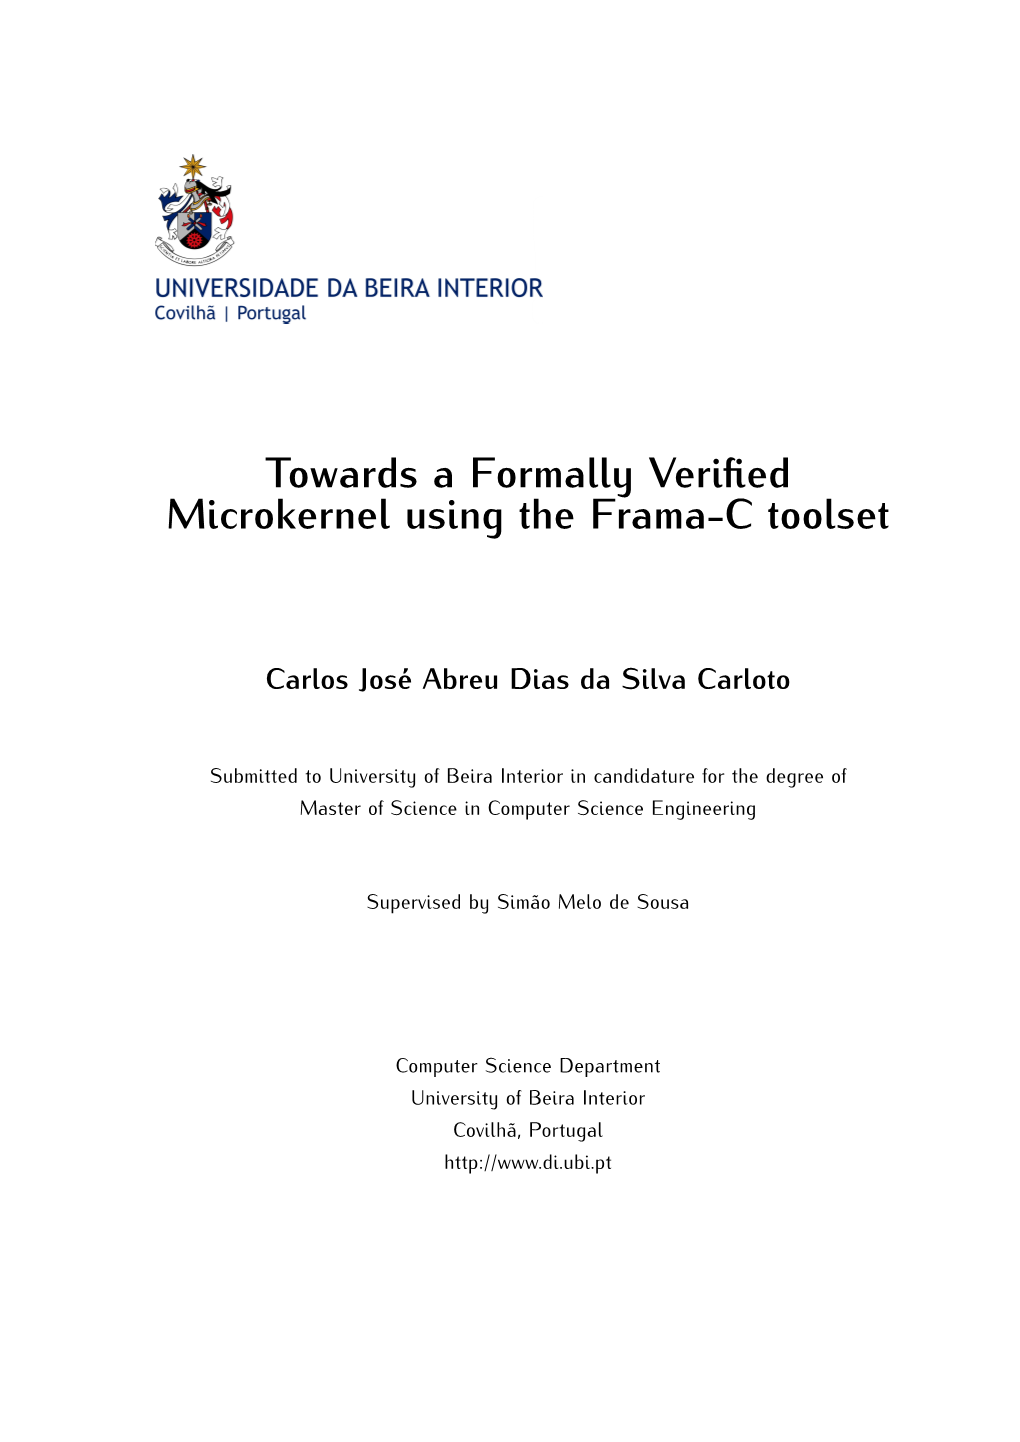 Towards a Formally Verified Microkernel Using the Frama-C Toolset